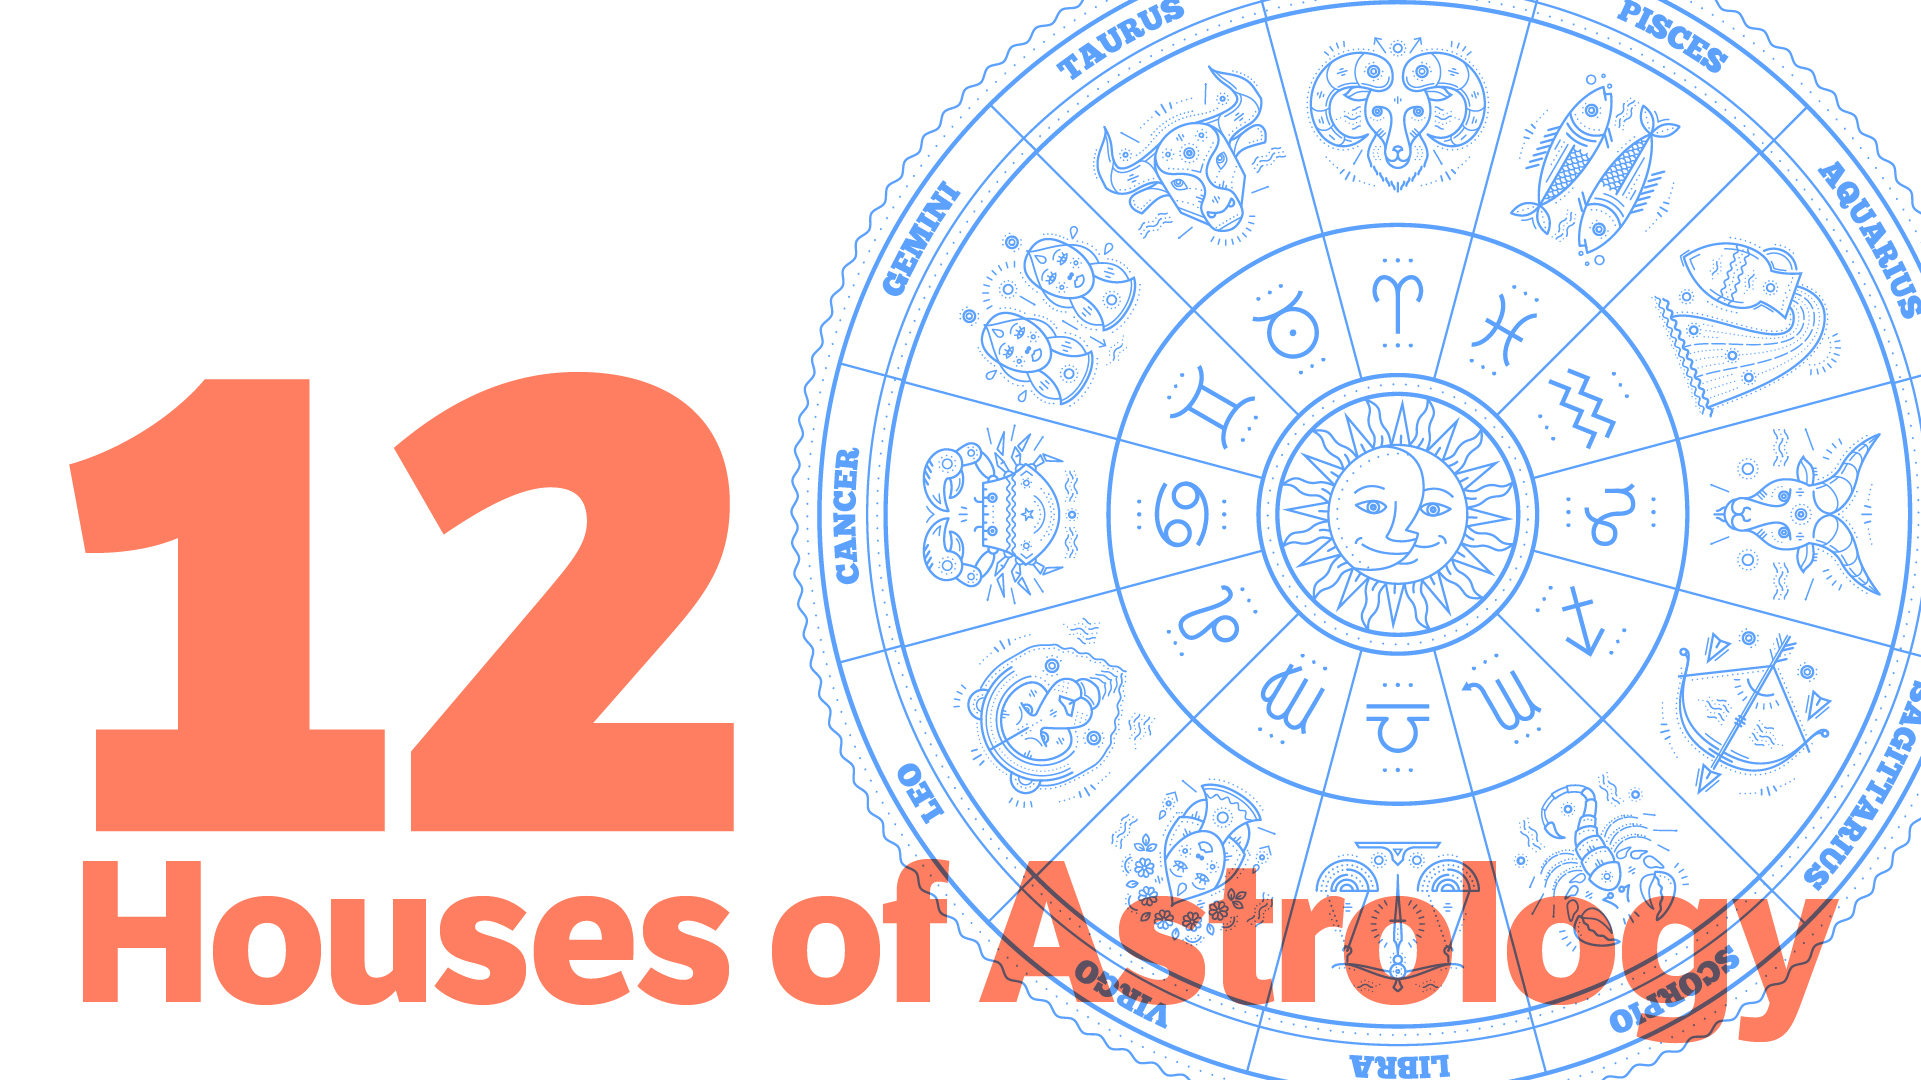 The Names, Symbols, & Meanings Of Each Zodiac Sign